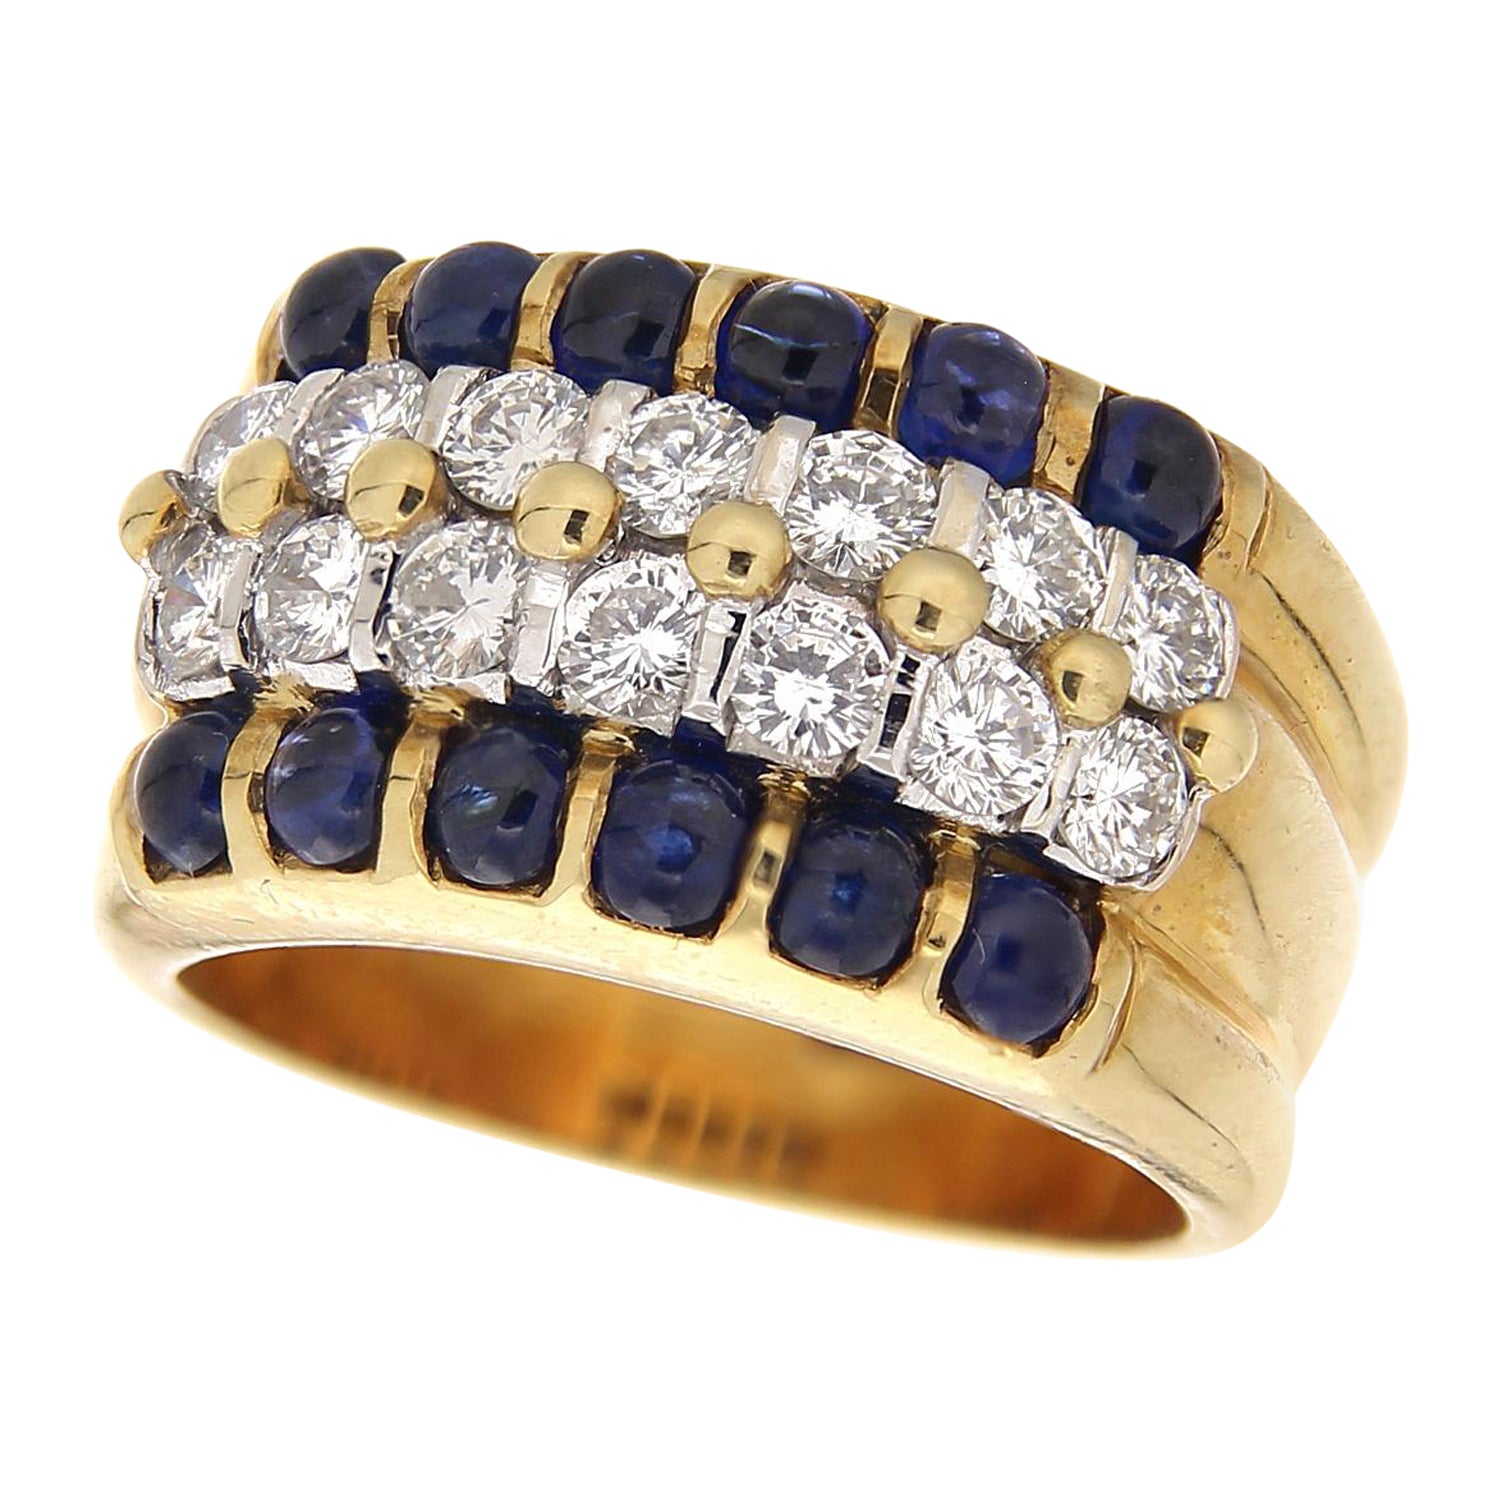 18Kt Yellow Gold Ring White Diamonds 1.10 ct & Cabochon-Cut Blue Sapphires 2.04